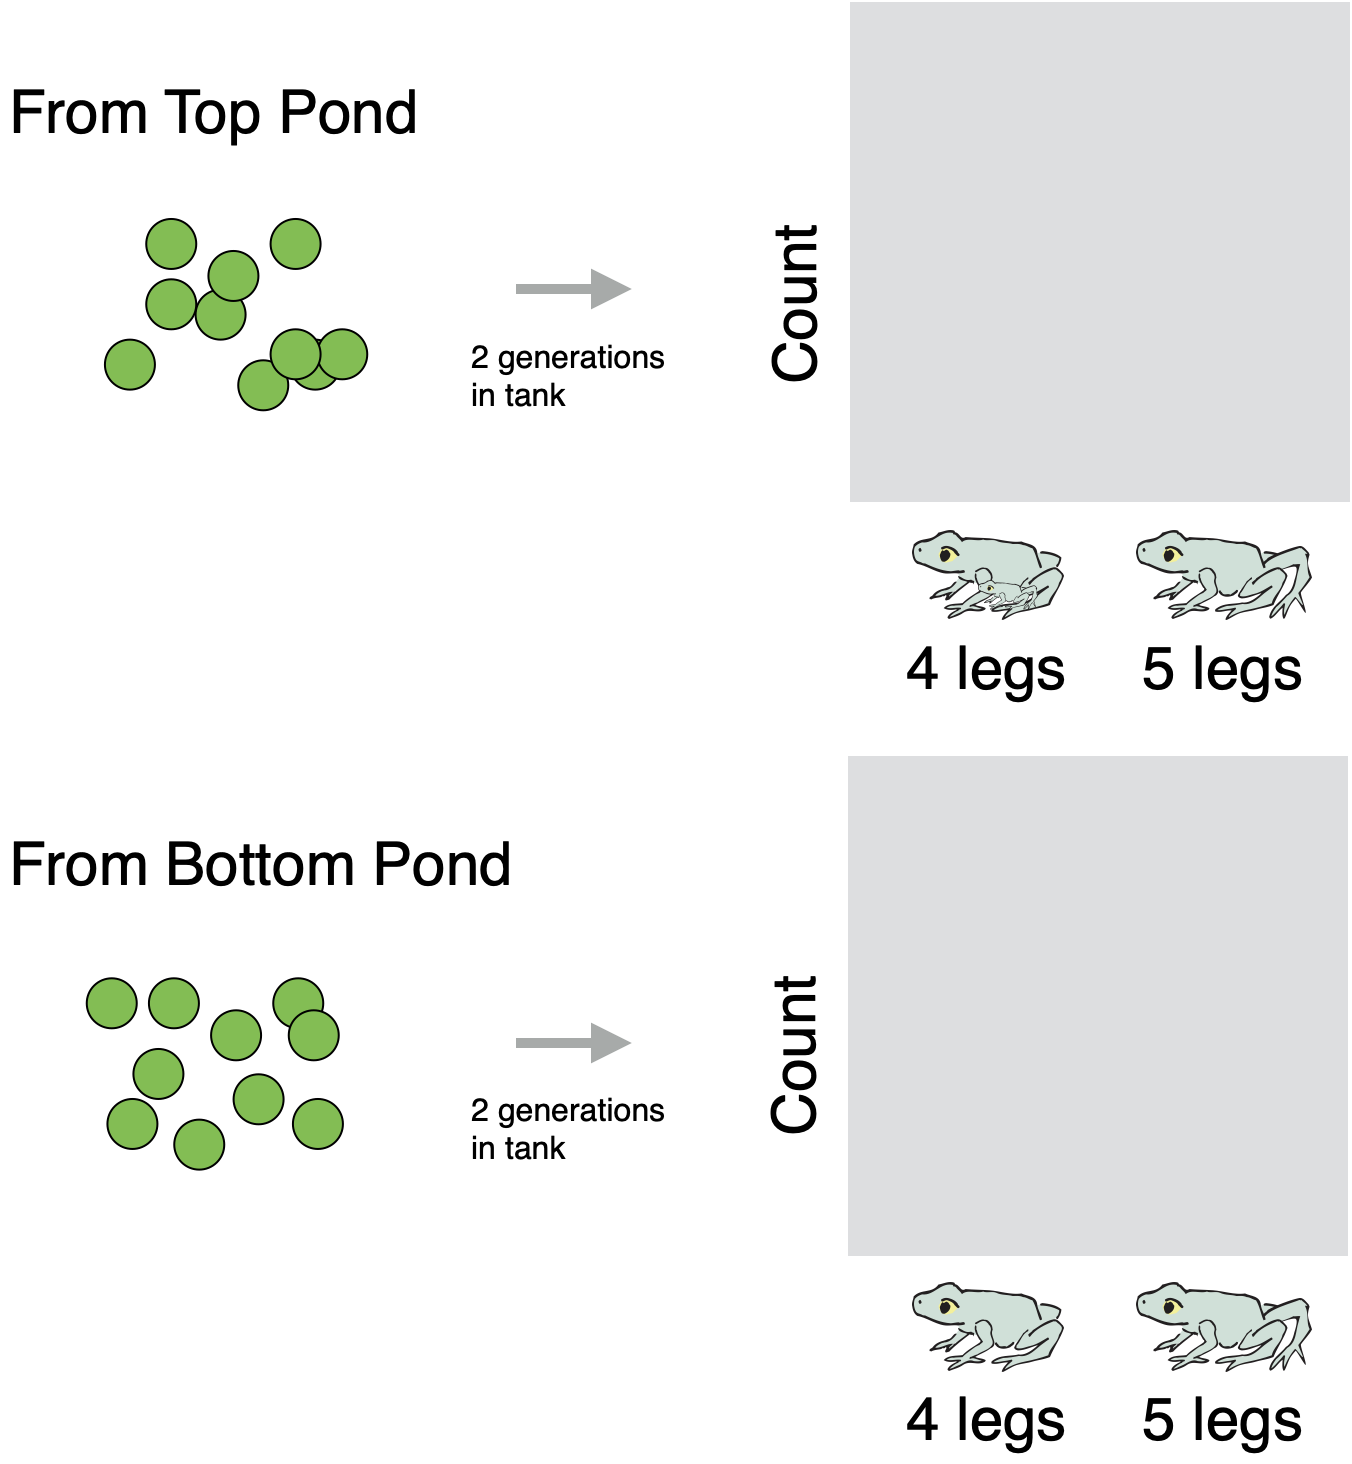 Diagram showing the setup for a pair of graphs, one above the other. The top graph is labeled From Top Pond, with an illustration showing a collection of green dots and an arrow, pointing from the dots to the graph, labeled 2 generations in tank. The bottom graph is labeled From Bottom Pond, with an illustration showing a collection of green dots and an arrow, pointing from the dots to the graph, labeled 2 generations in tank. In both graphs, the vertical axis is Count and the horizontal axis has categories 4 legs and 5 legs, each illustrated with a cartoon frog.